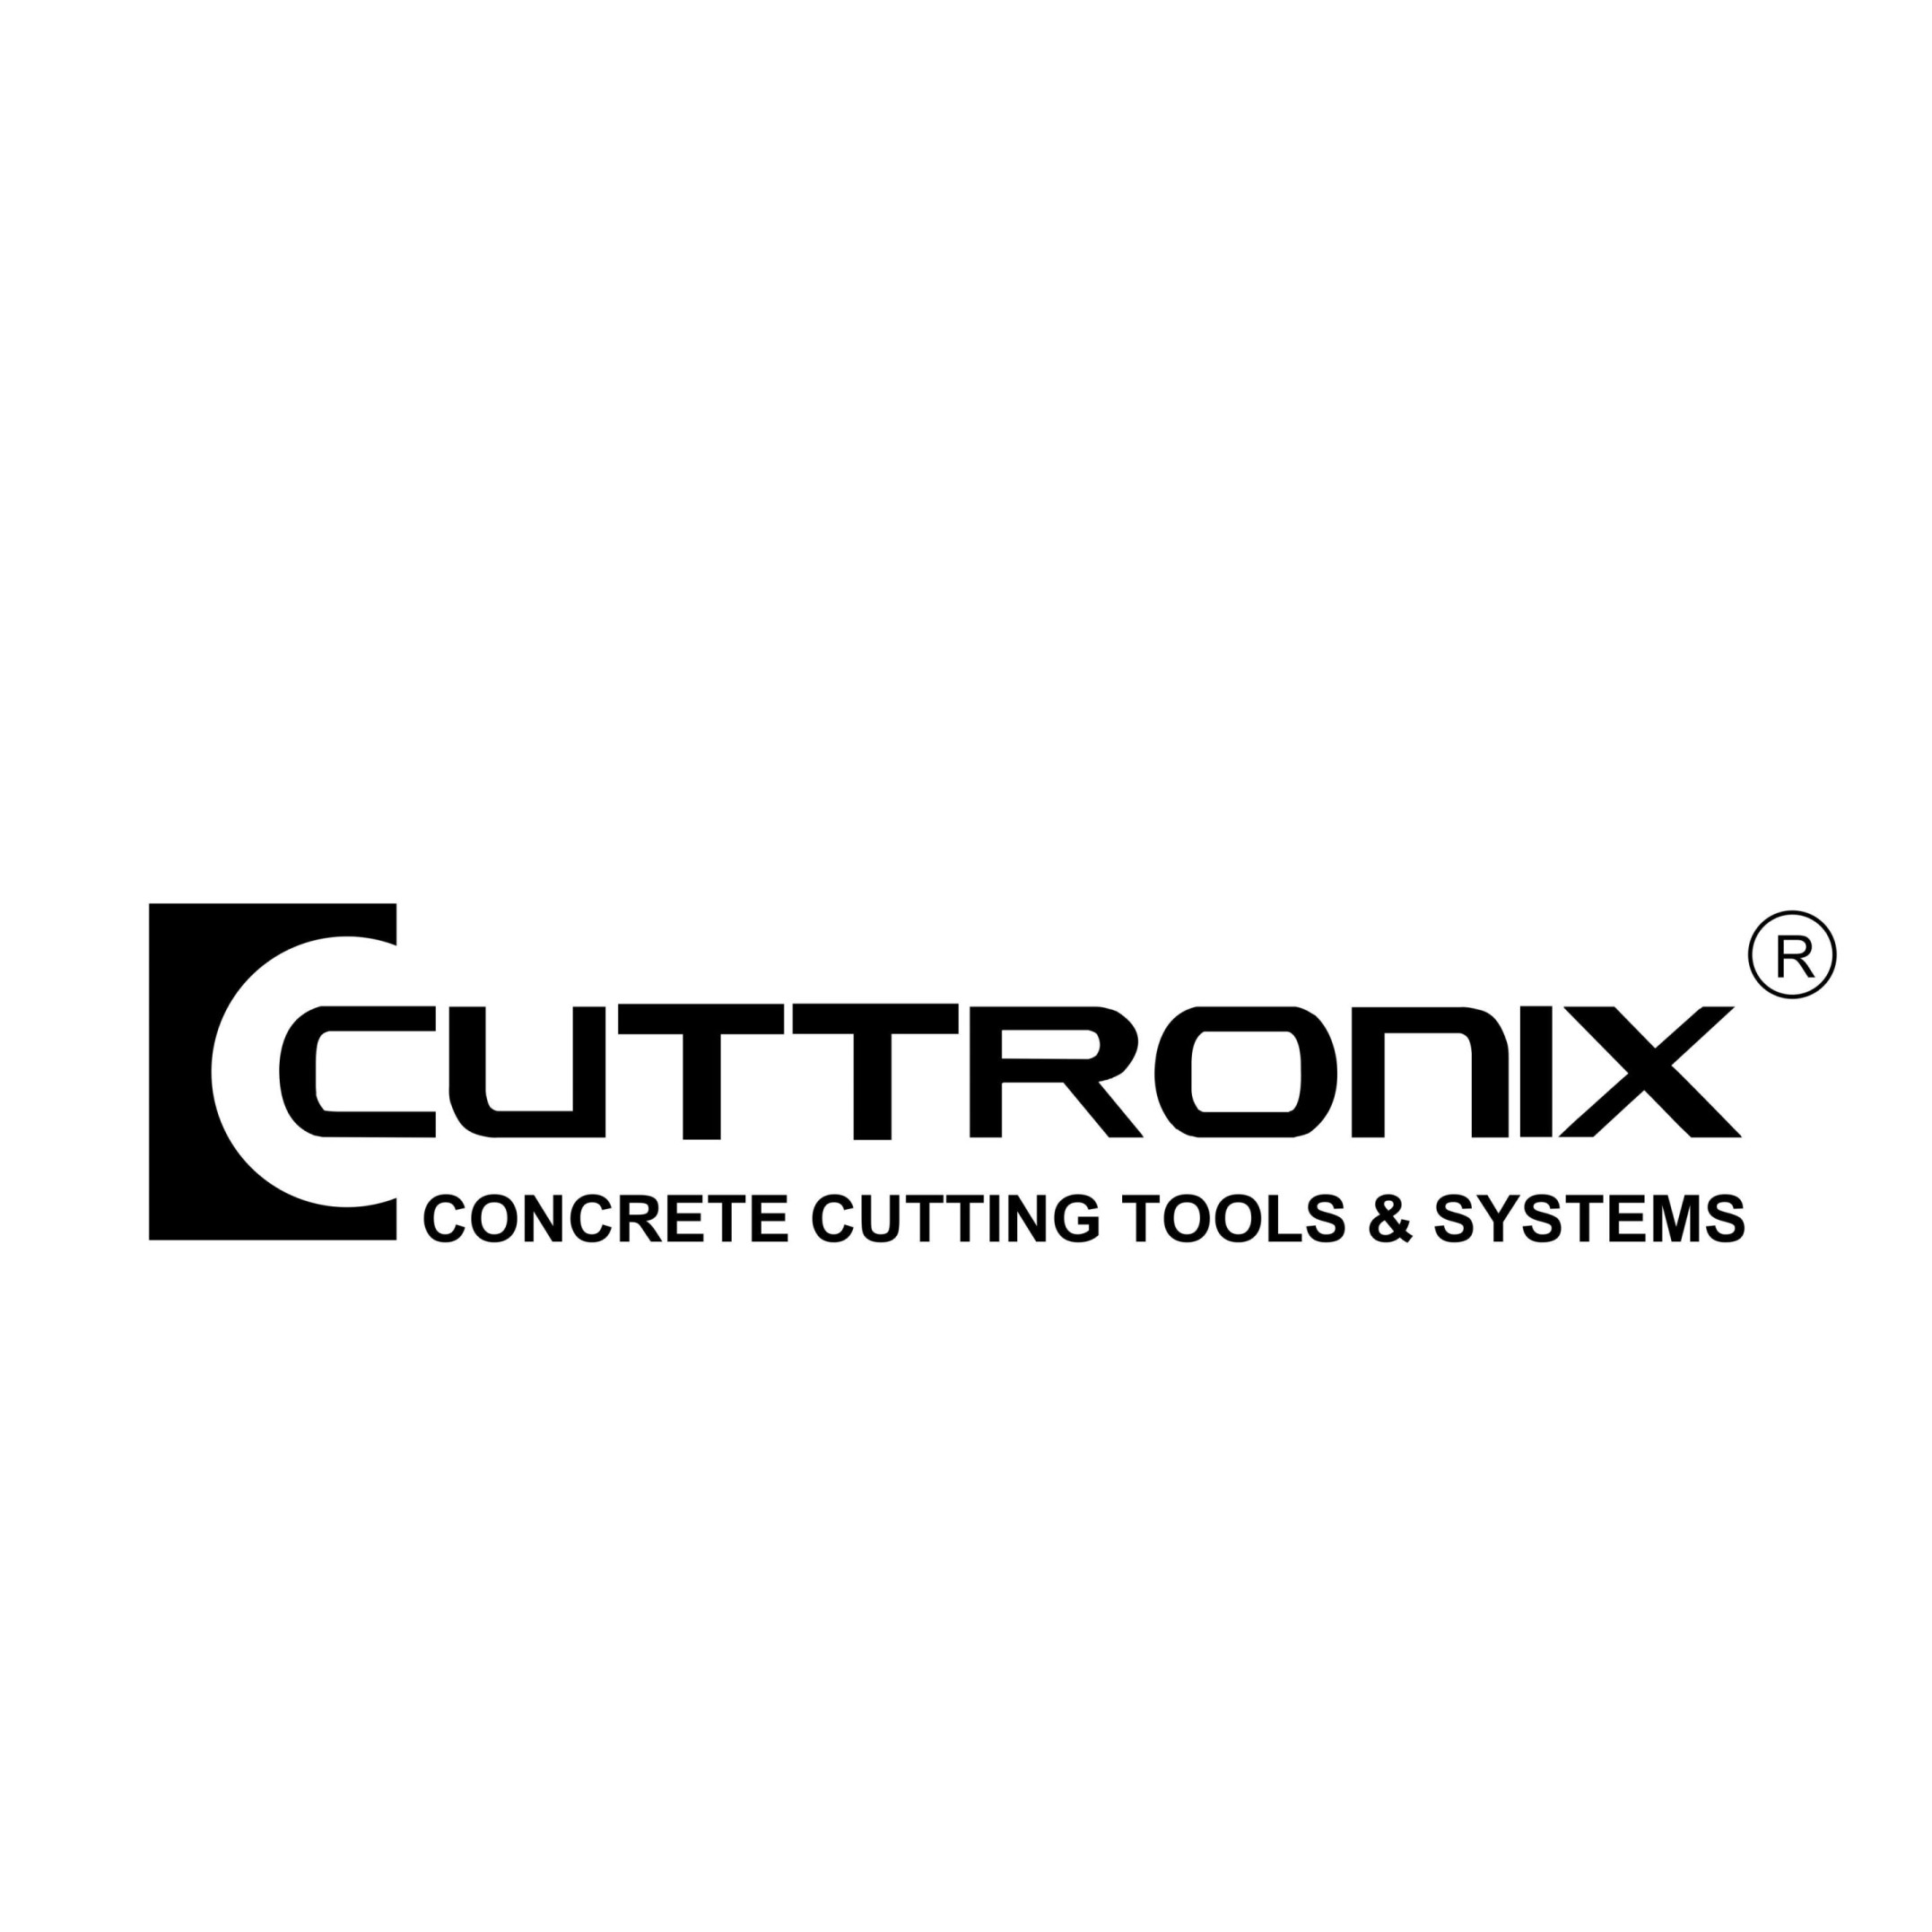 CUTTRONIX OÜ - Cutting concrete to a new level - Cuttronix is ​​a reliable partner in construction and renovation!